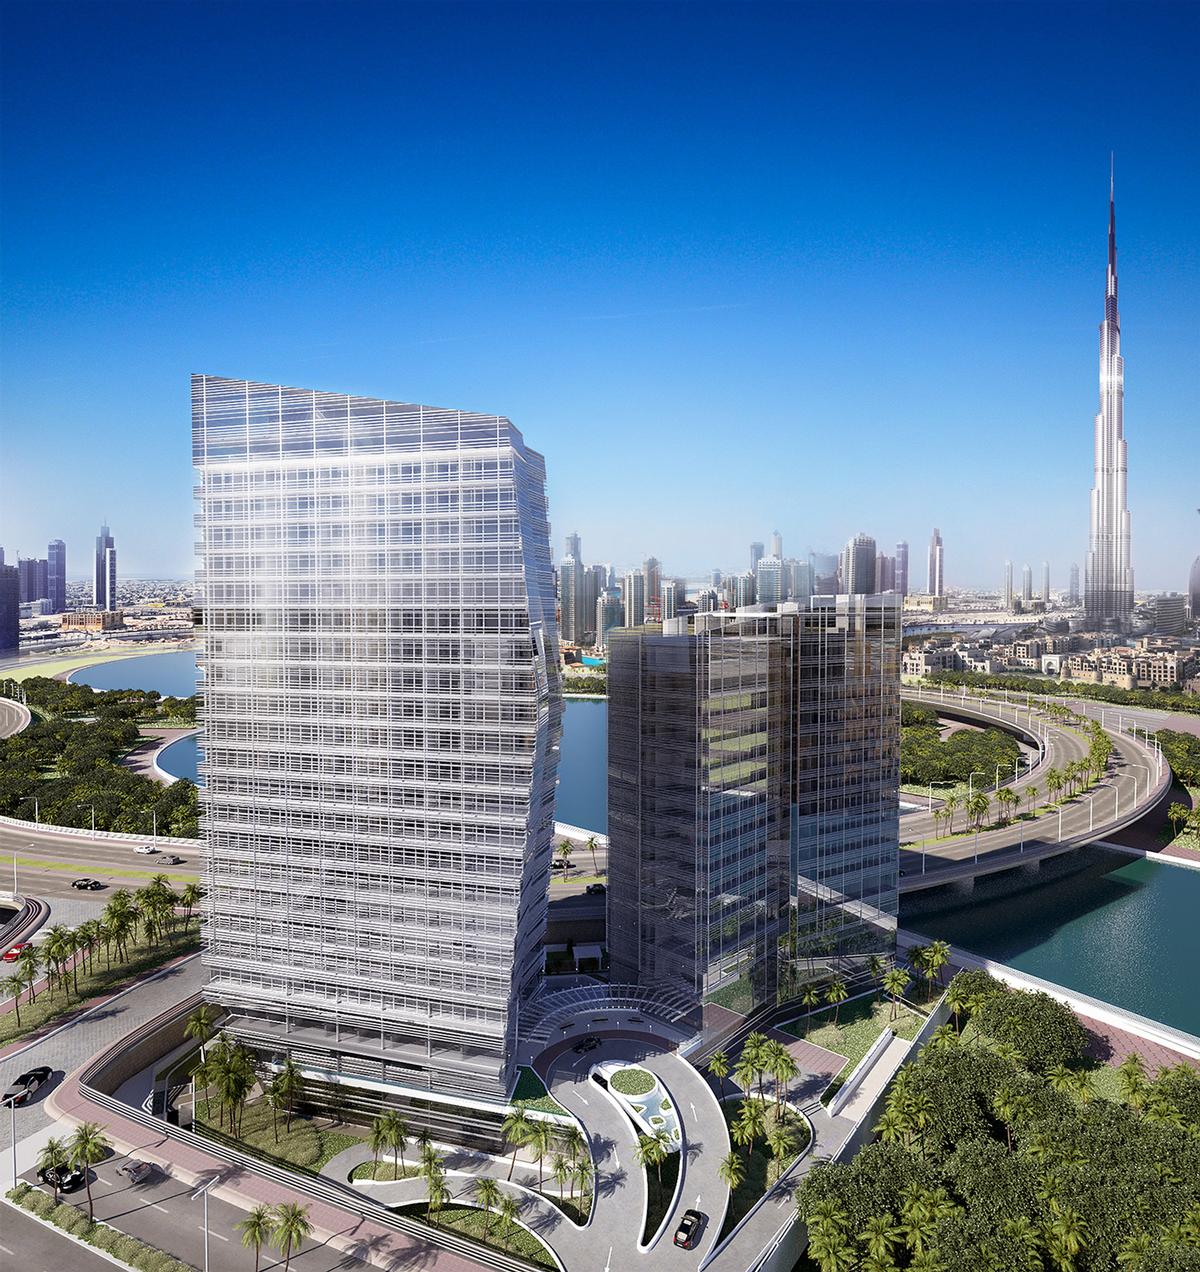 The hotel will feature views of Dubai's Water Canal / Langham